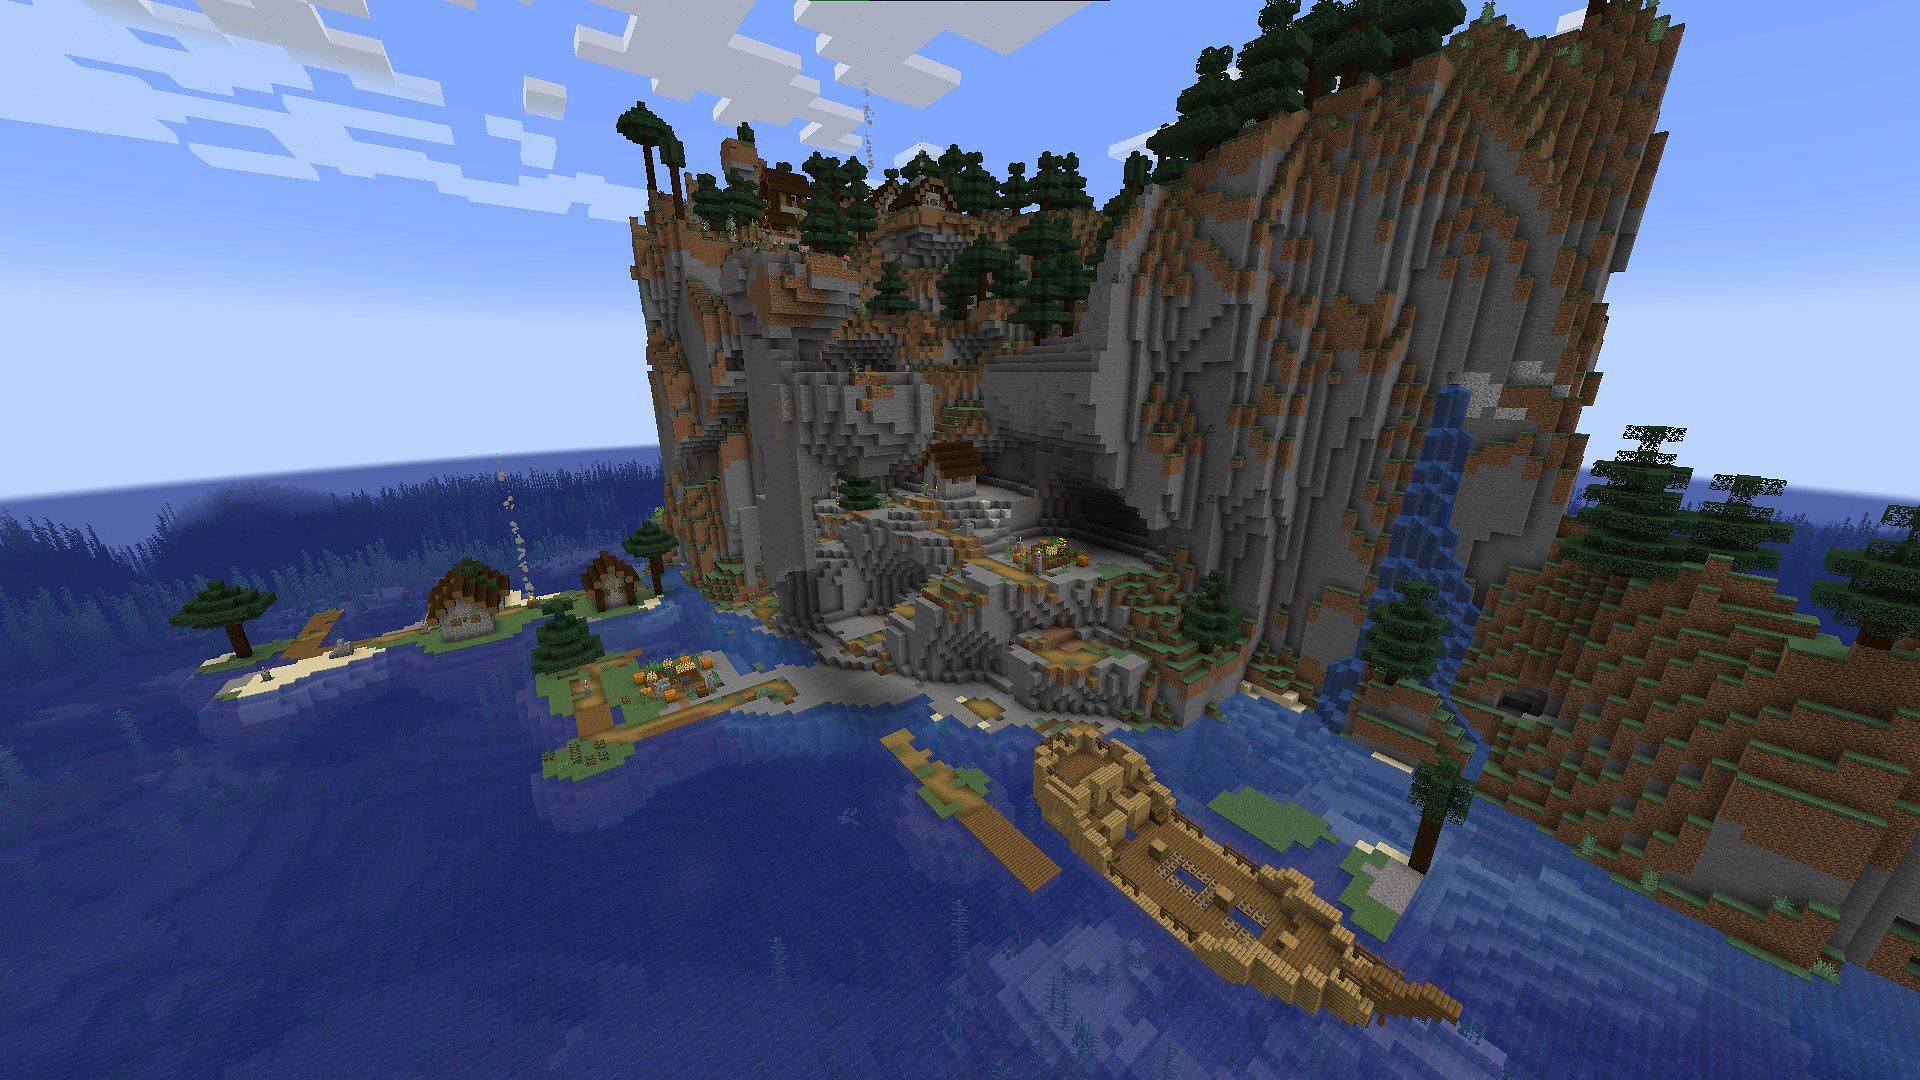 Island with a shipwreck full of riches (Image via Minecraft)